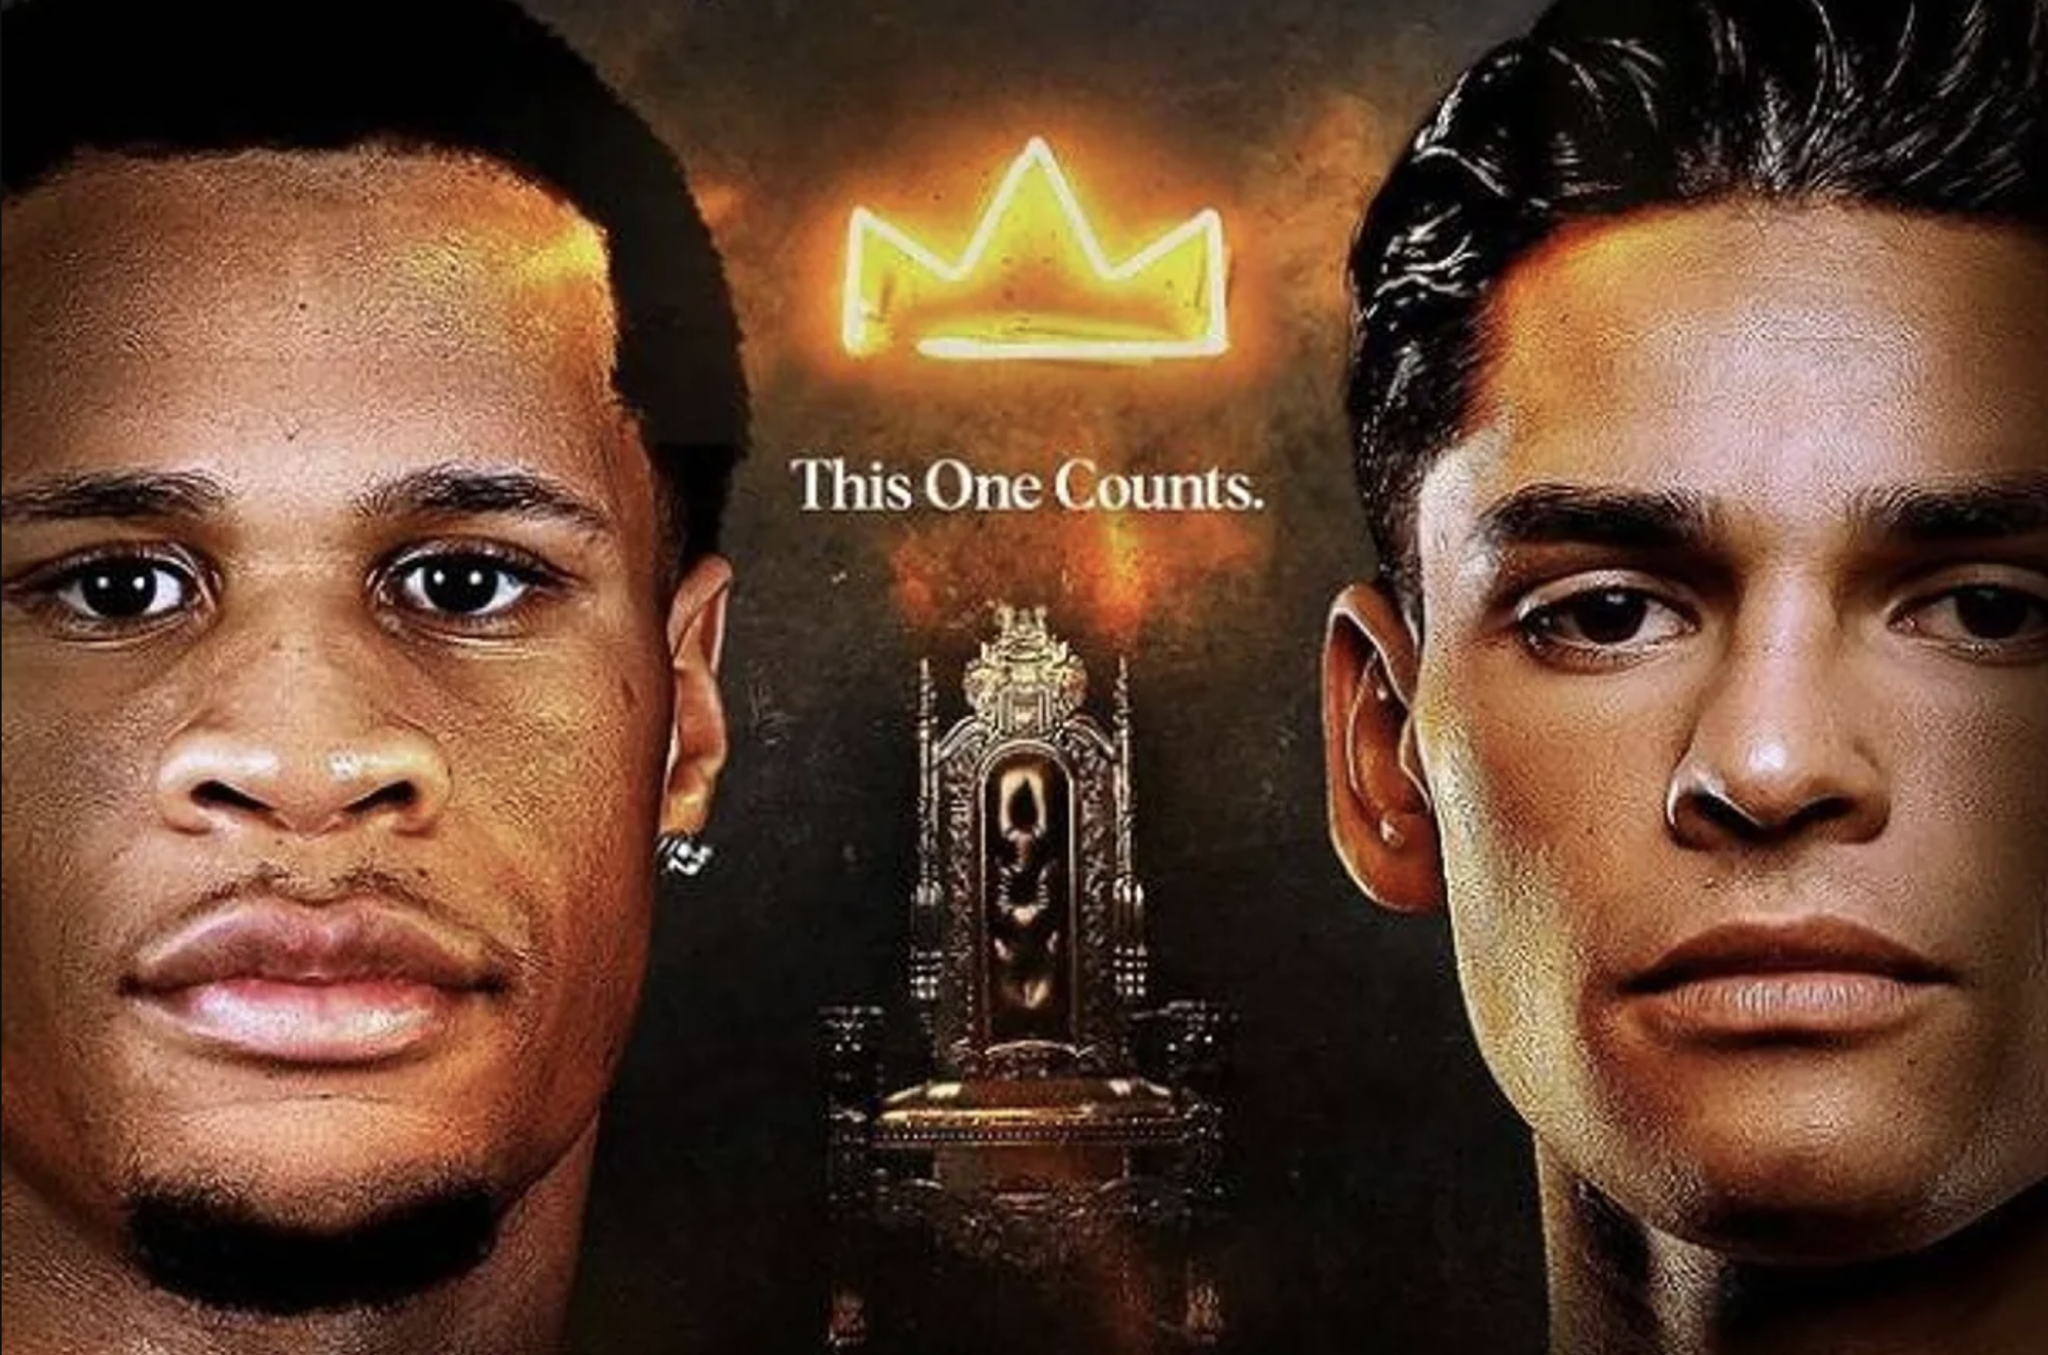 Ryan Garcia vs Devin Haney: What time is it and where to watch tonights fight?